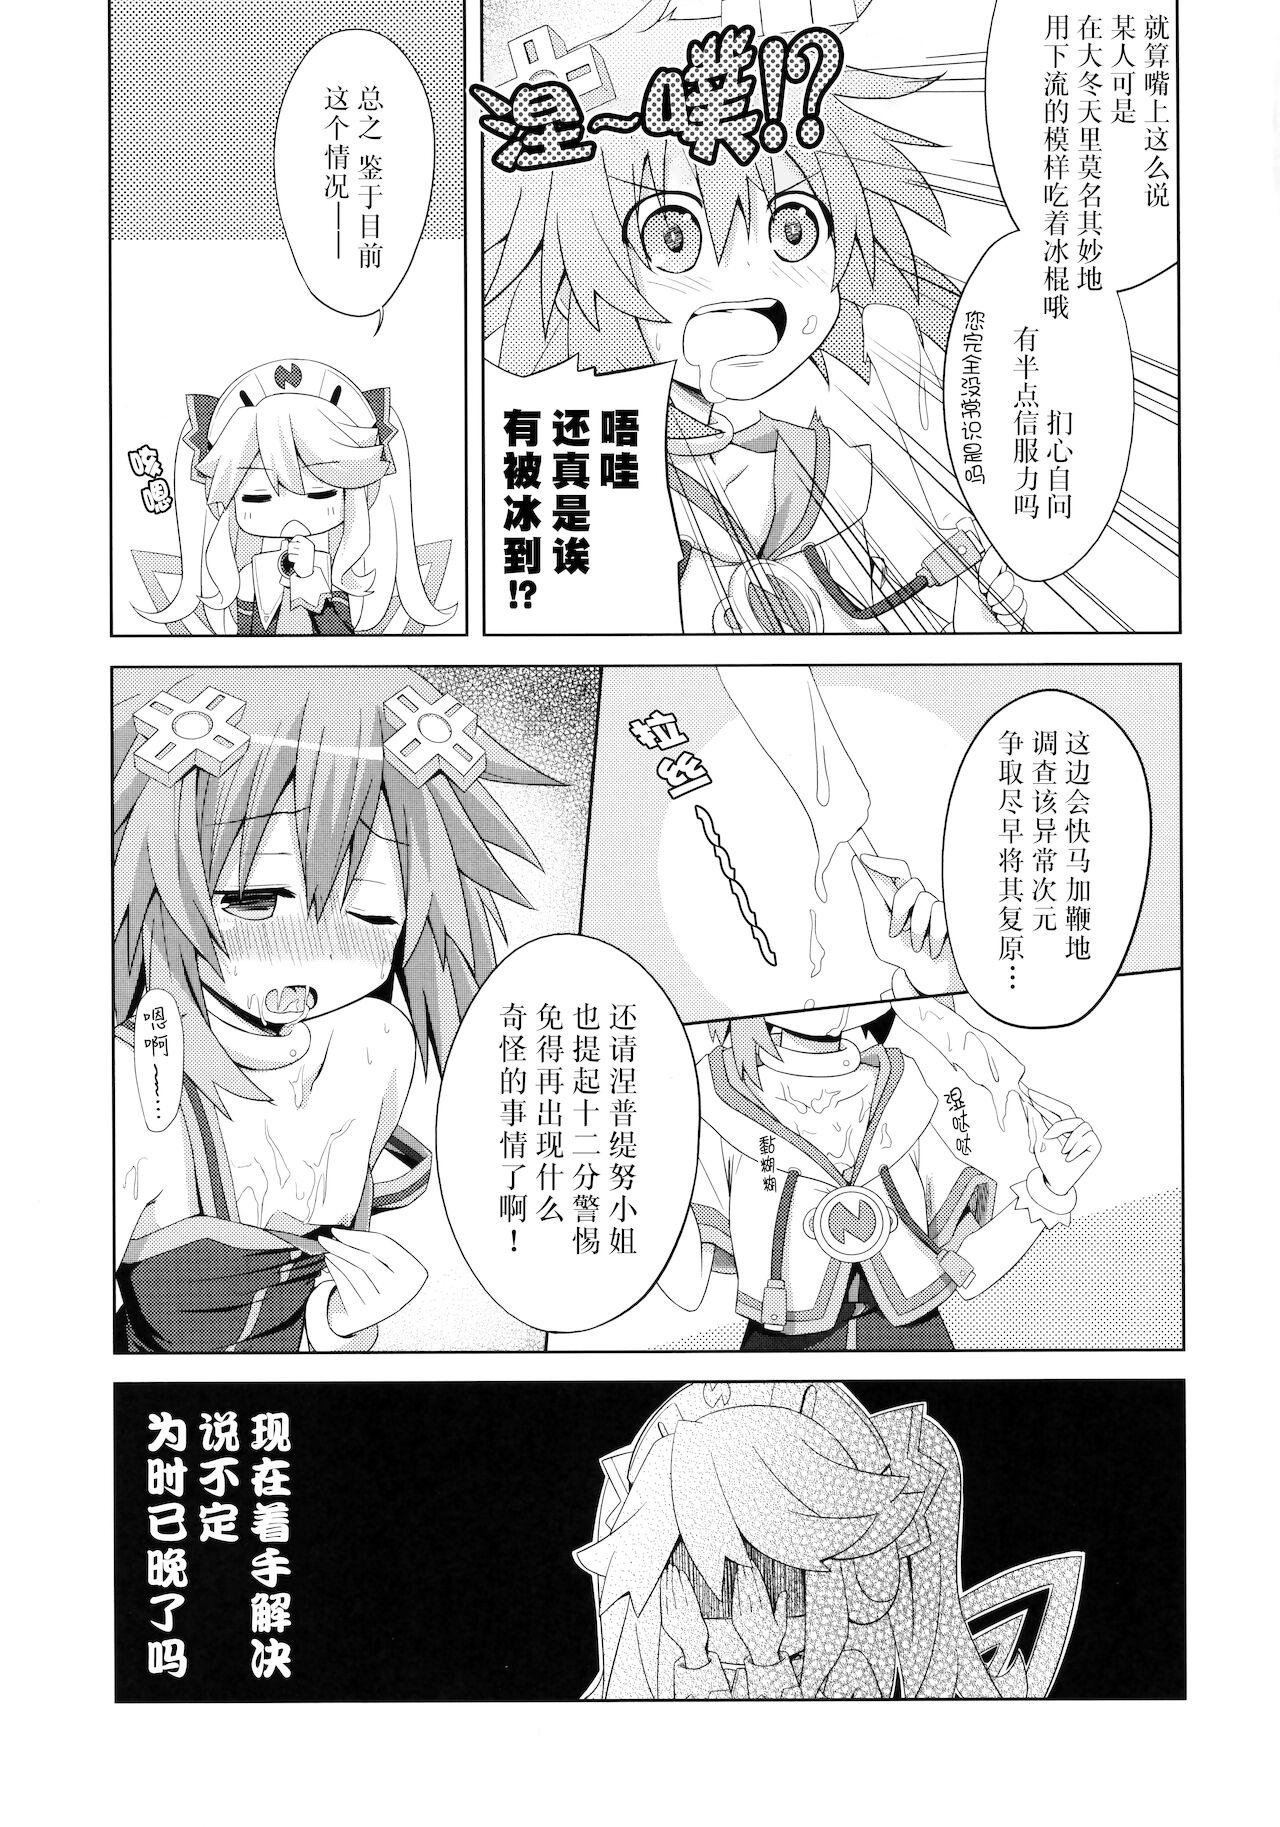 Brother A certain Nepgear was harmed in the making of this doujinshi - Hyperdimension neptunia | choujigen game neptune Fitness - Page 6